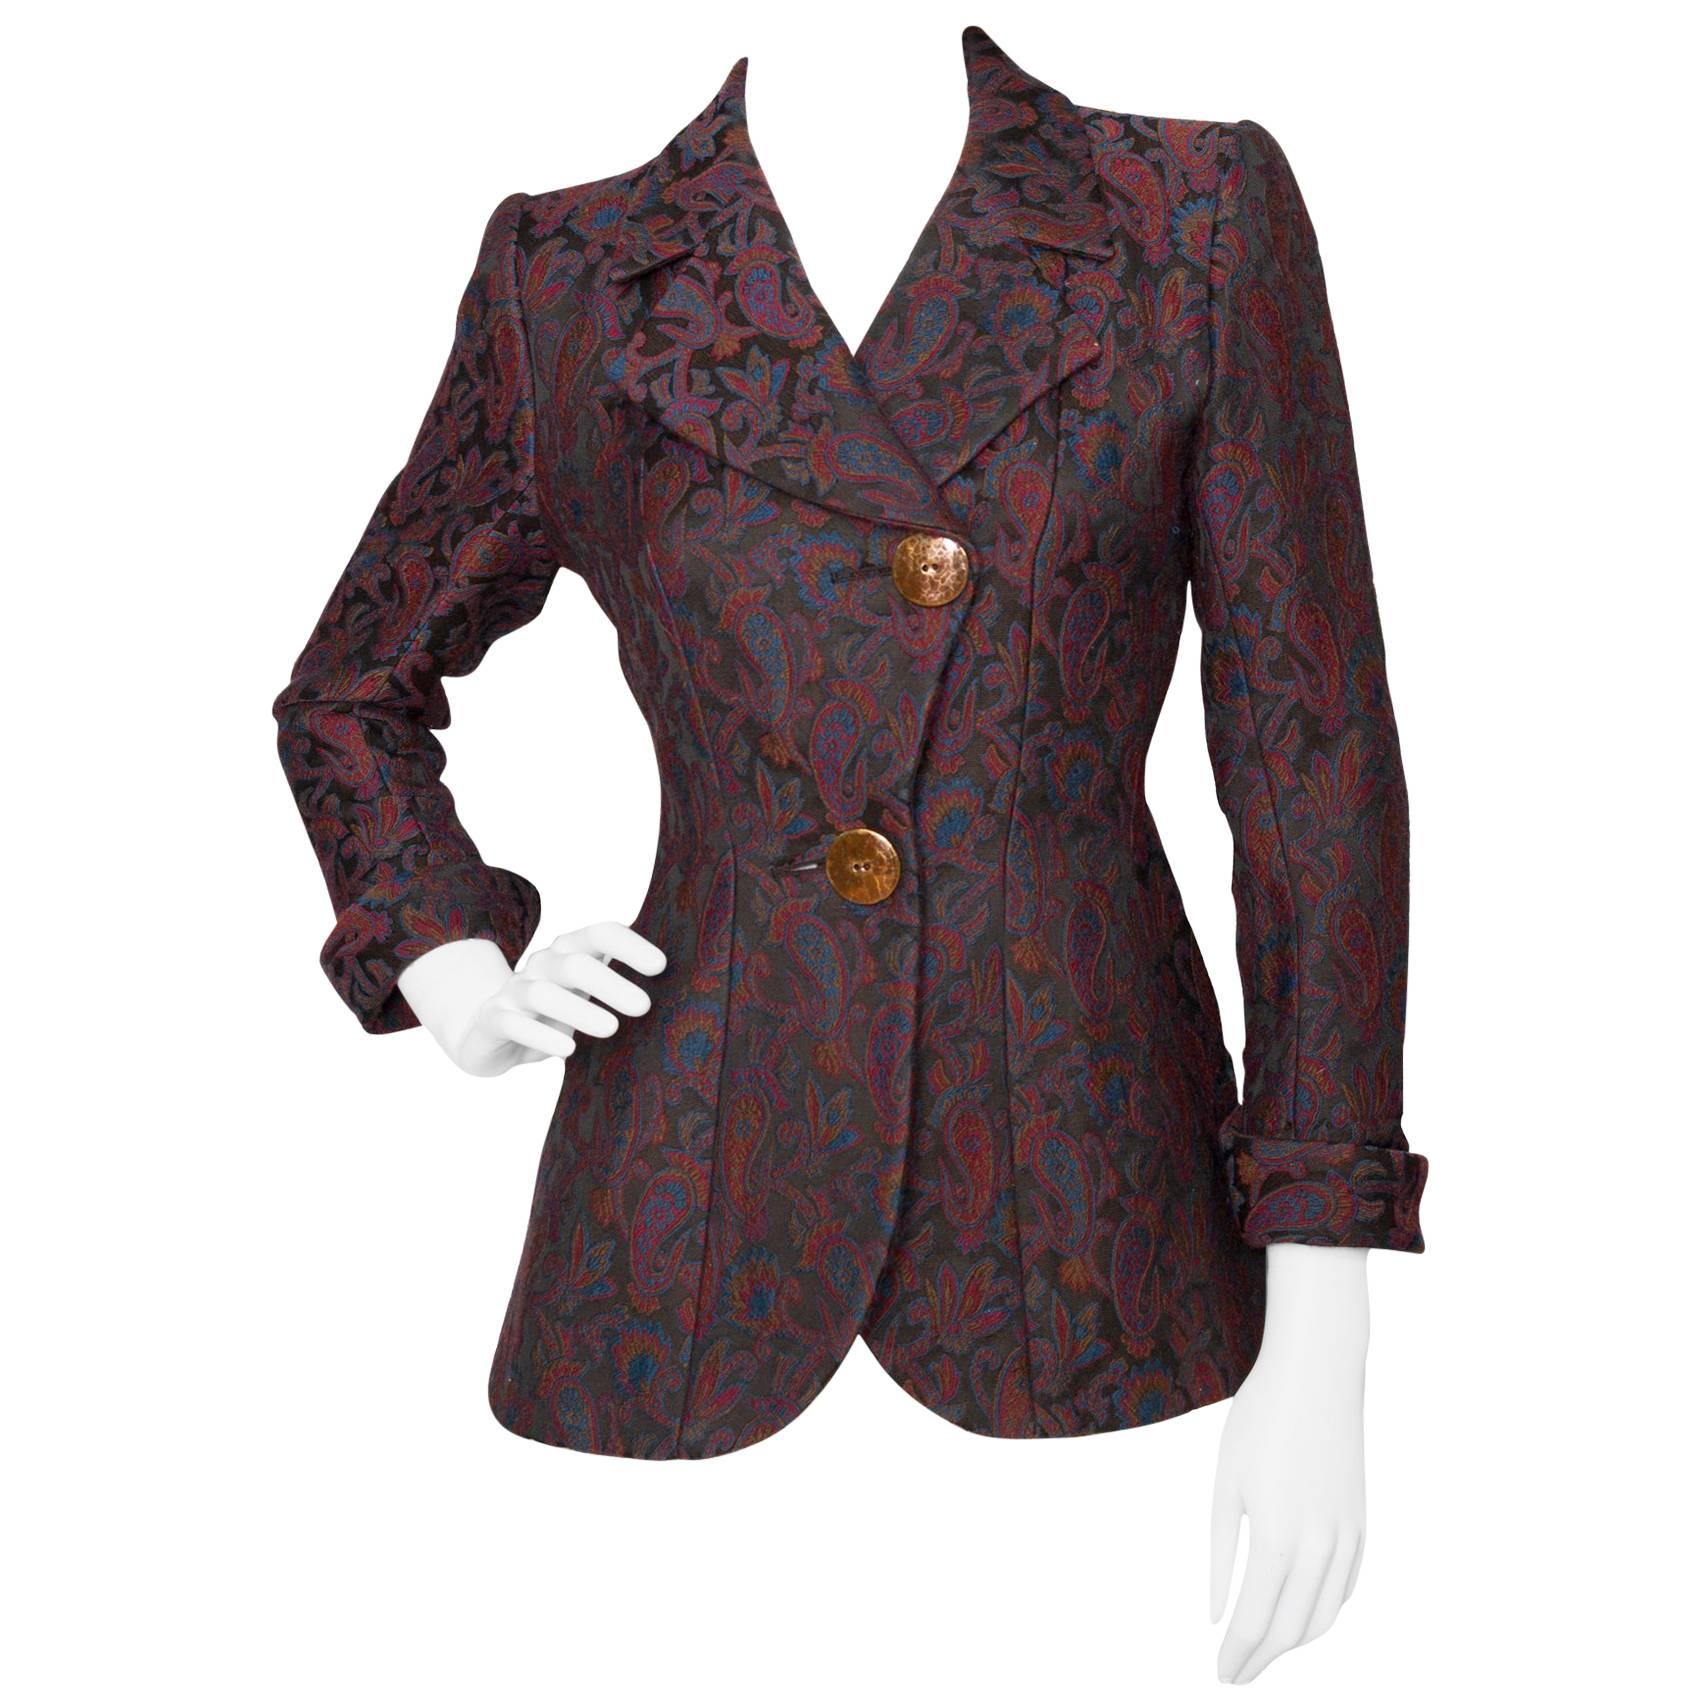  Yves Saint Laurent Vintage Rive Gauche Tapestry Paisley Printed Blazer XS For Sale